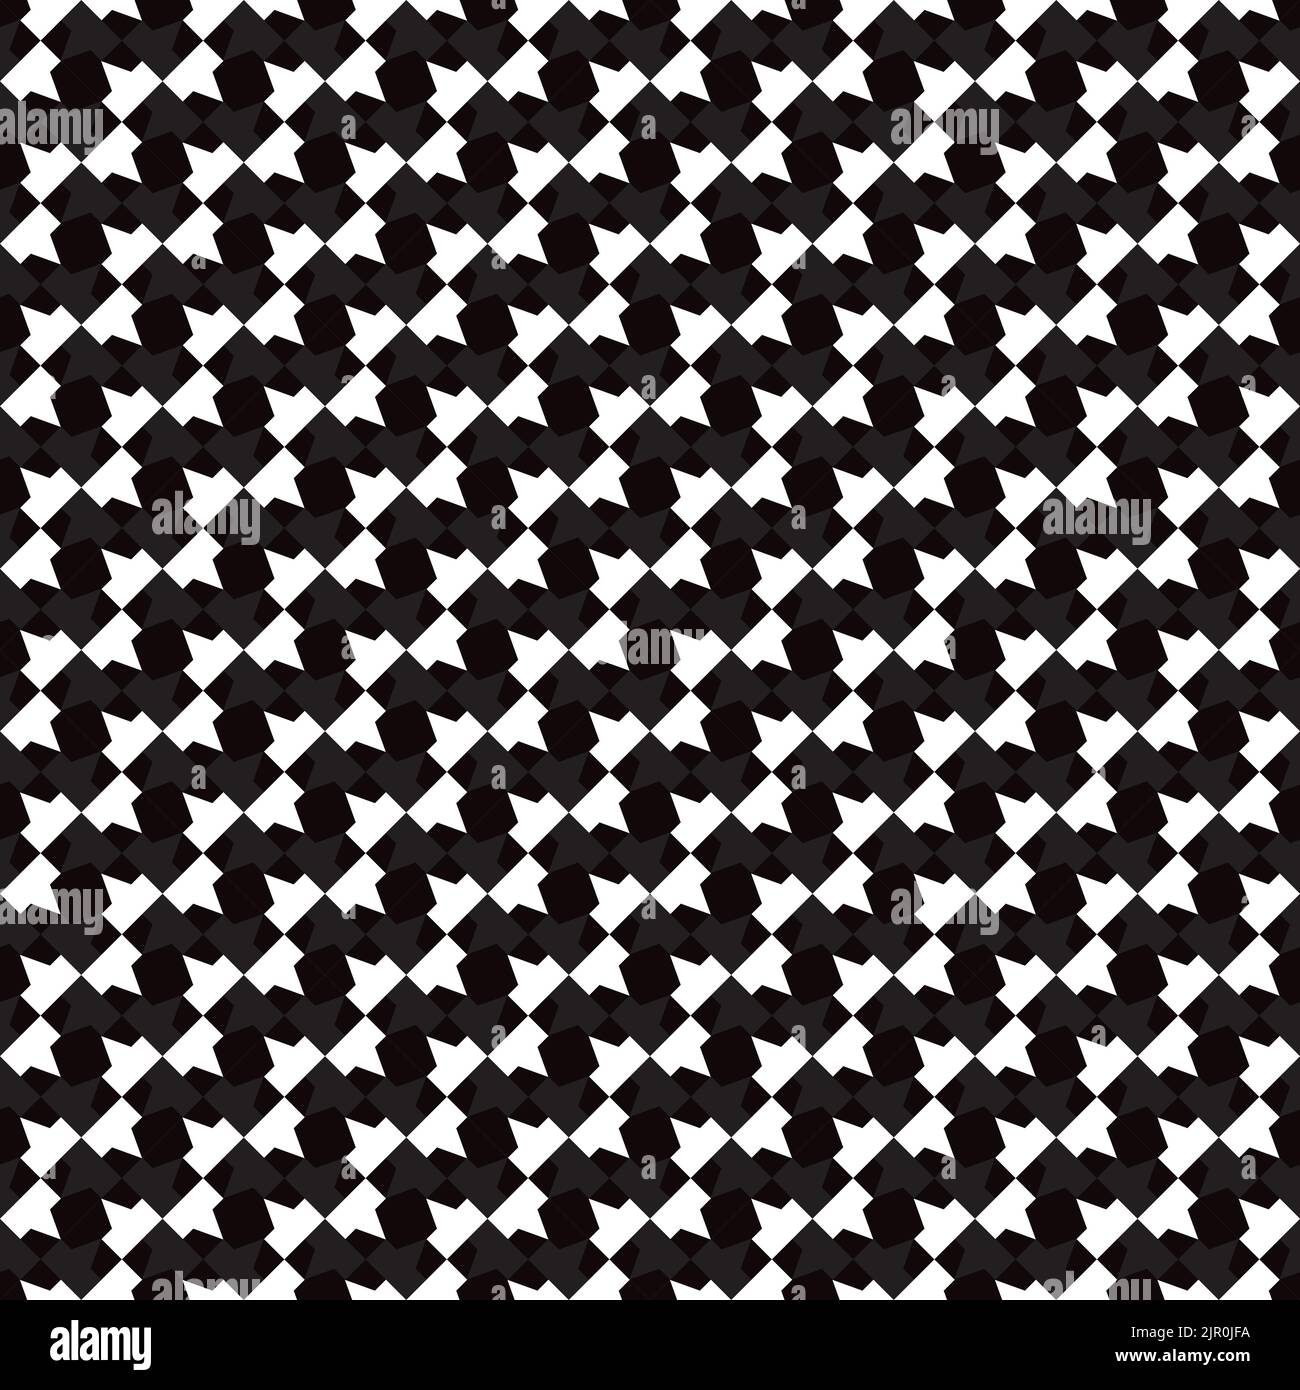 Seamless pattern design for wrapping paper, wallpaper, fabric